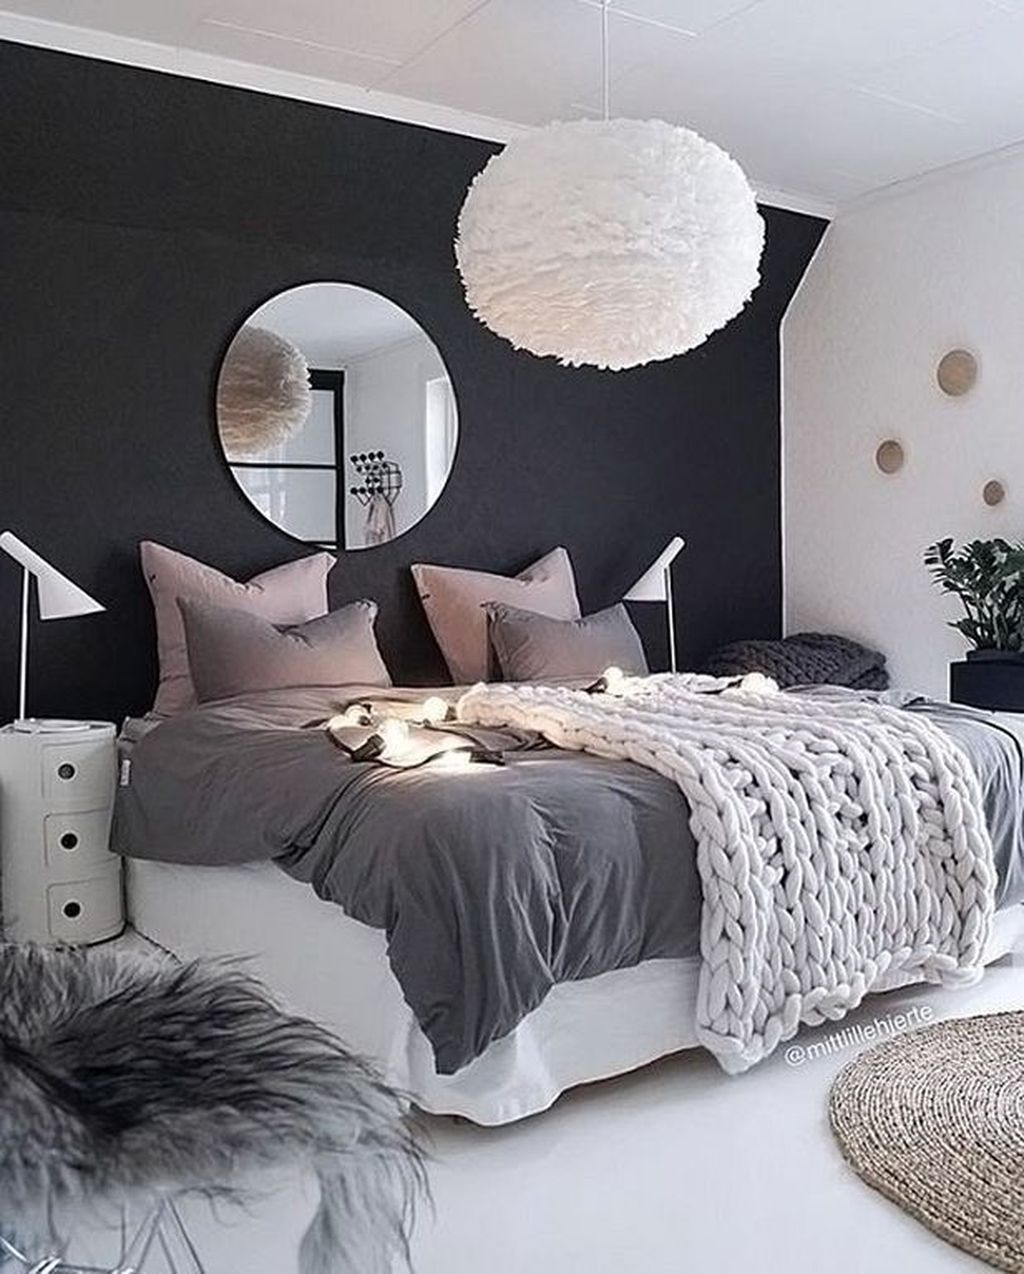 Gorgeous Bedroom Design Ideas For Teenagers 33 - MAGZHOUSE